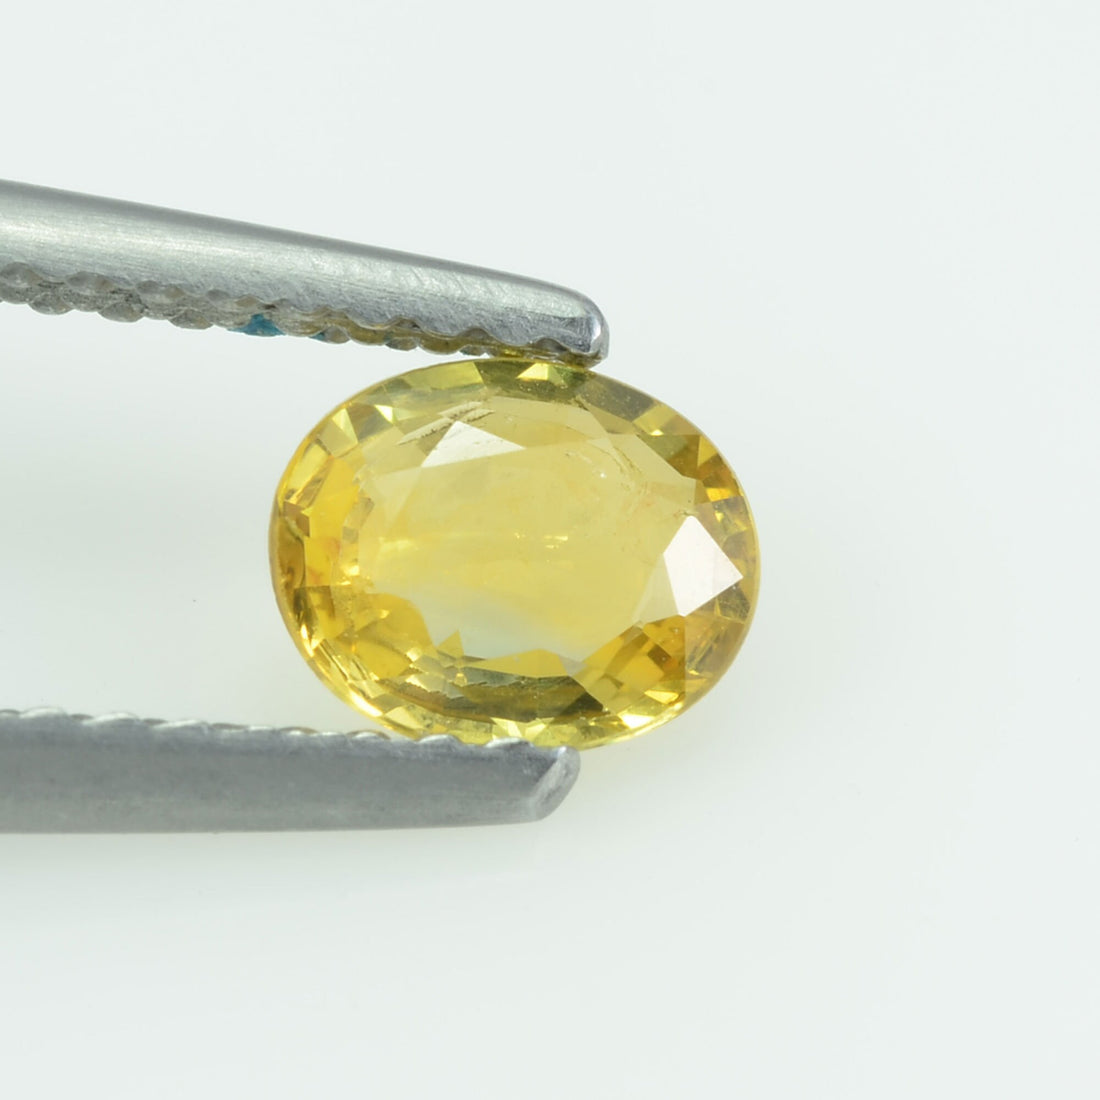 0.60 Cts Natural Yellow Sapphire Loose Gemstone Oval Cut